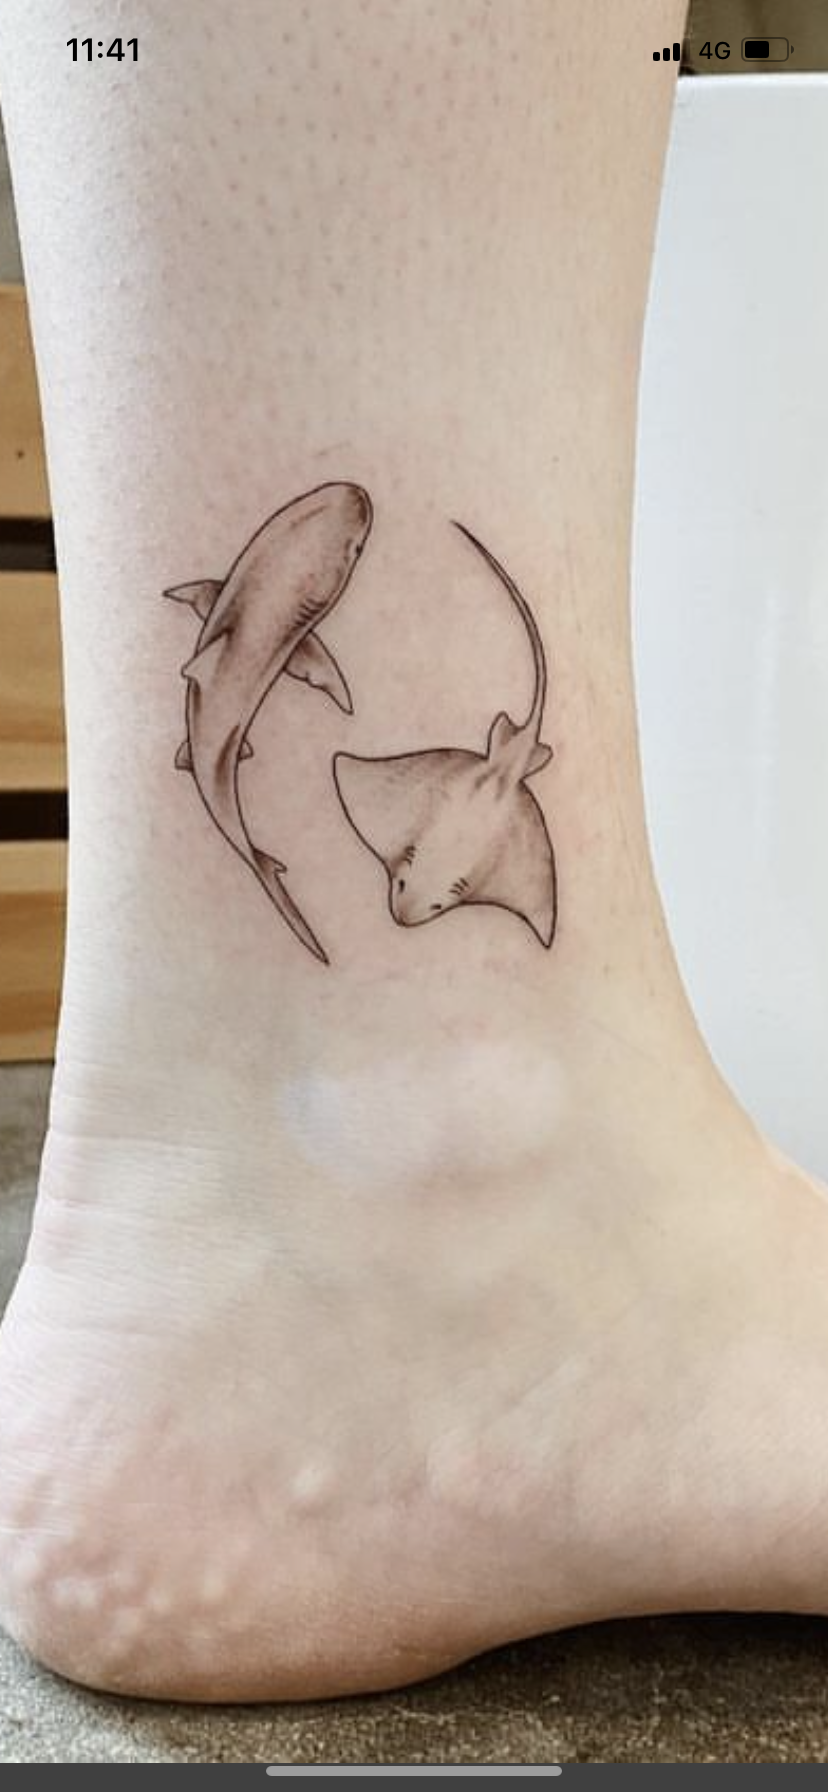 Make a Bold Statement with Stylish Shark
Tattoo Ideas: Edgy and Chic